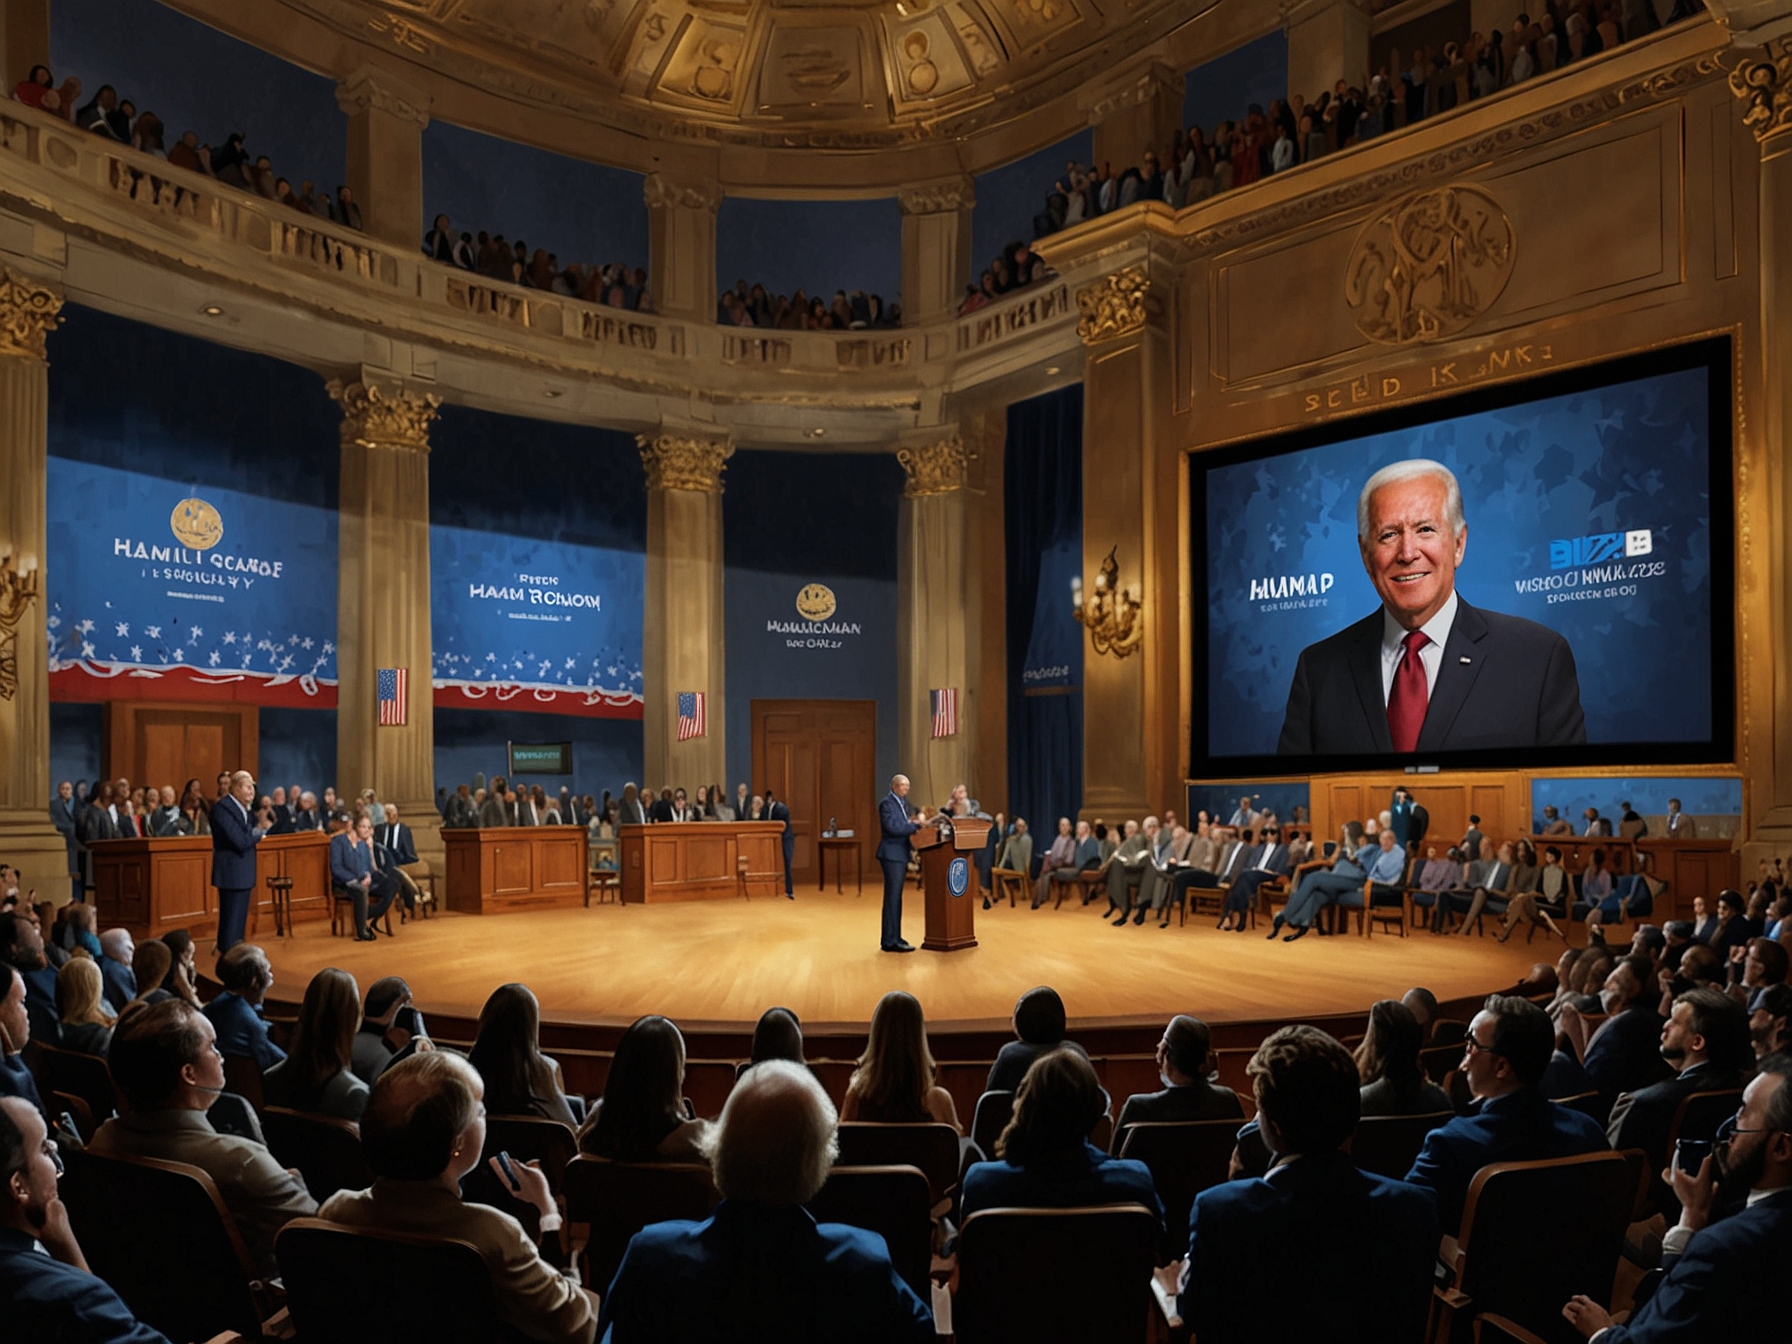 An image showing a lively crowd inside The Hamilton Live in downtown Washington D.C., with large screens displaying the Biden-Trump presidential debate and people engaged in discussion.